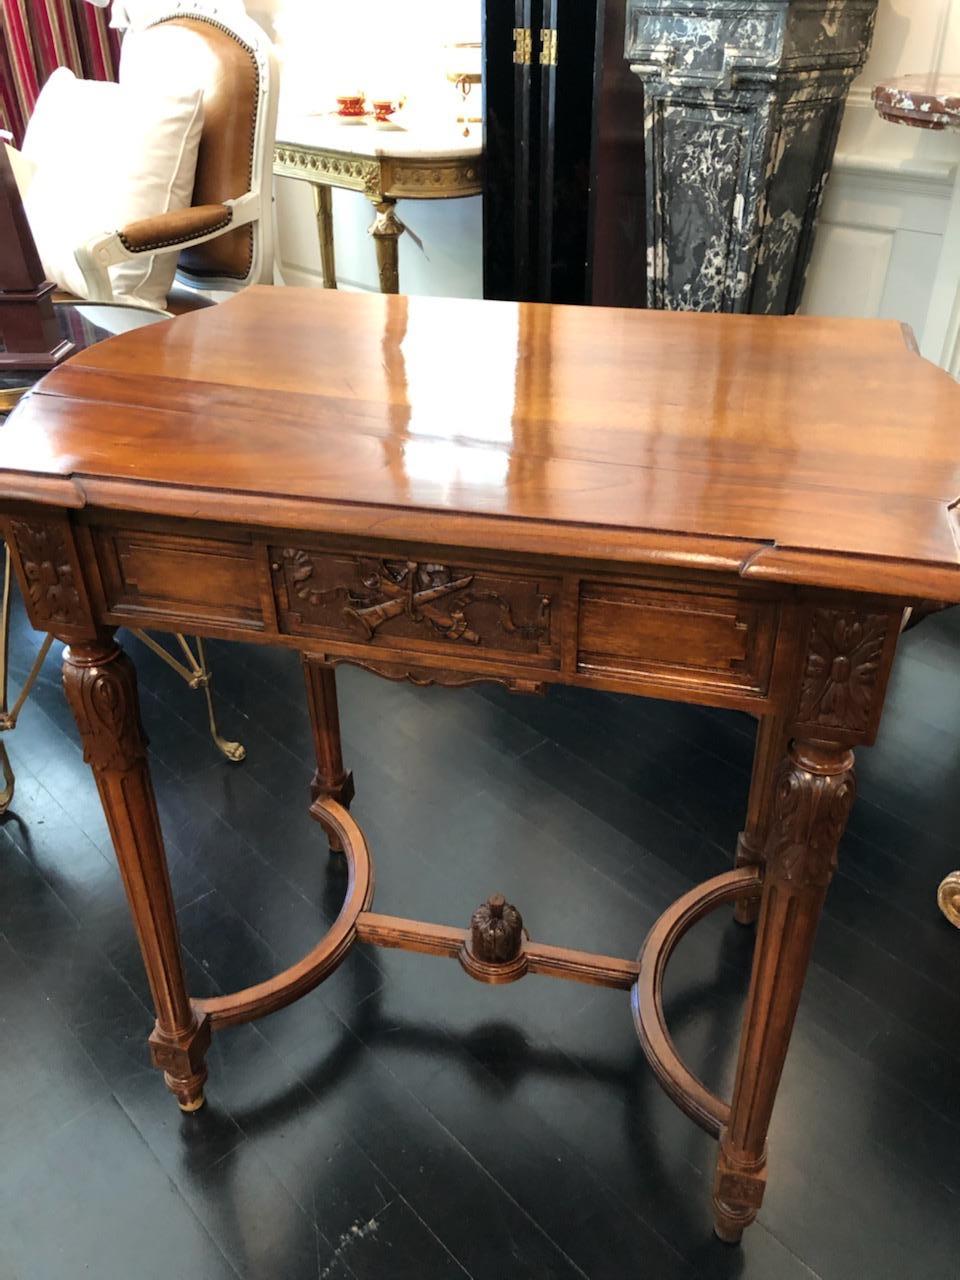 French Louis XVI style side table or writing table, Entretoise legs.
Lovely model decorated with musical instruments, scrolls, ribbons and feathers in the classical Louis XVI vernacular.